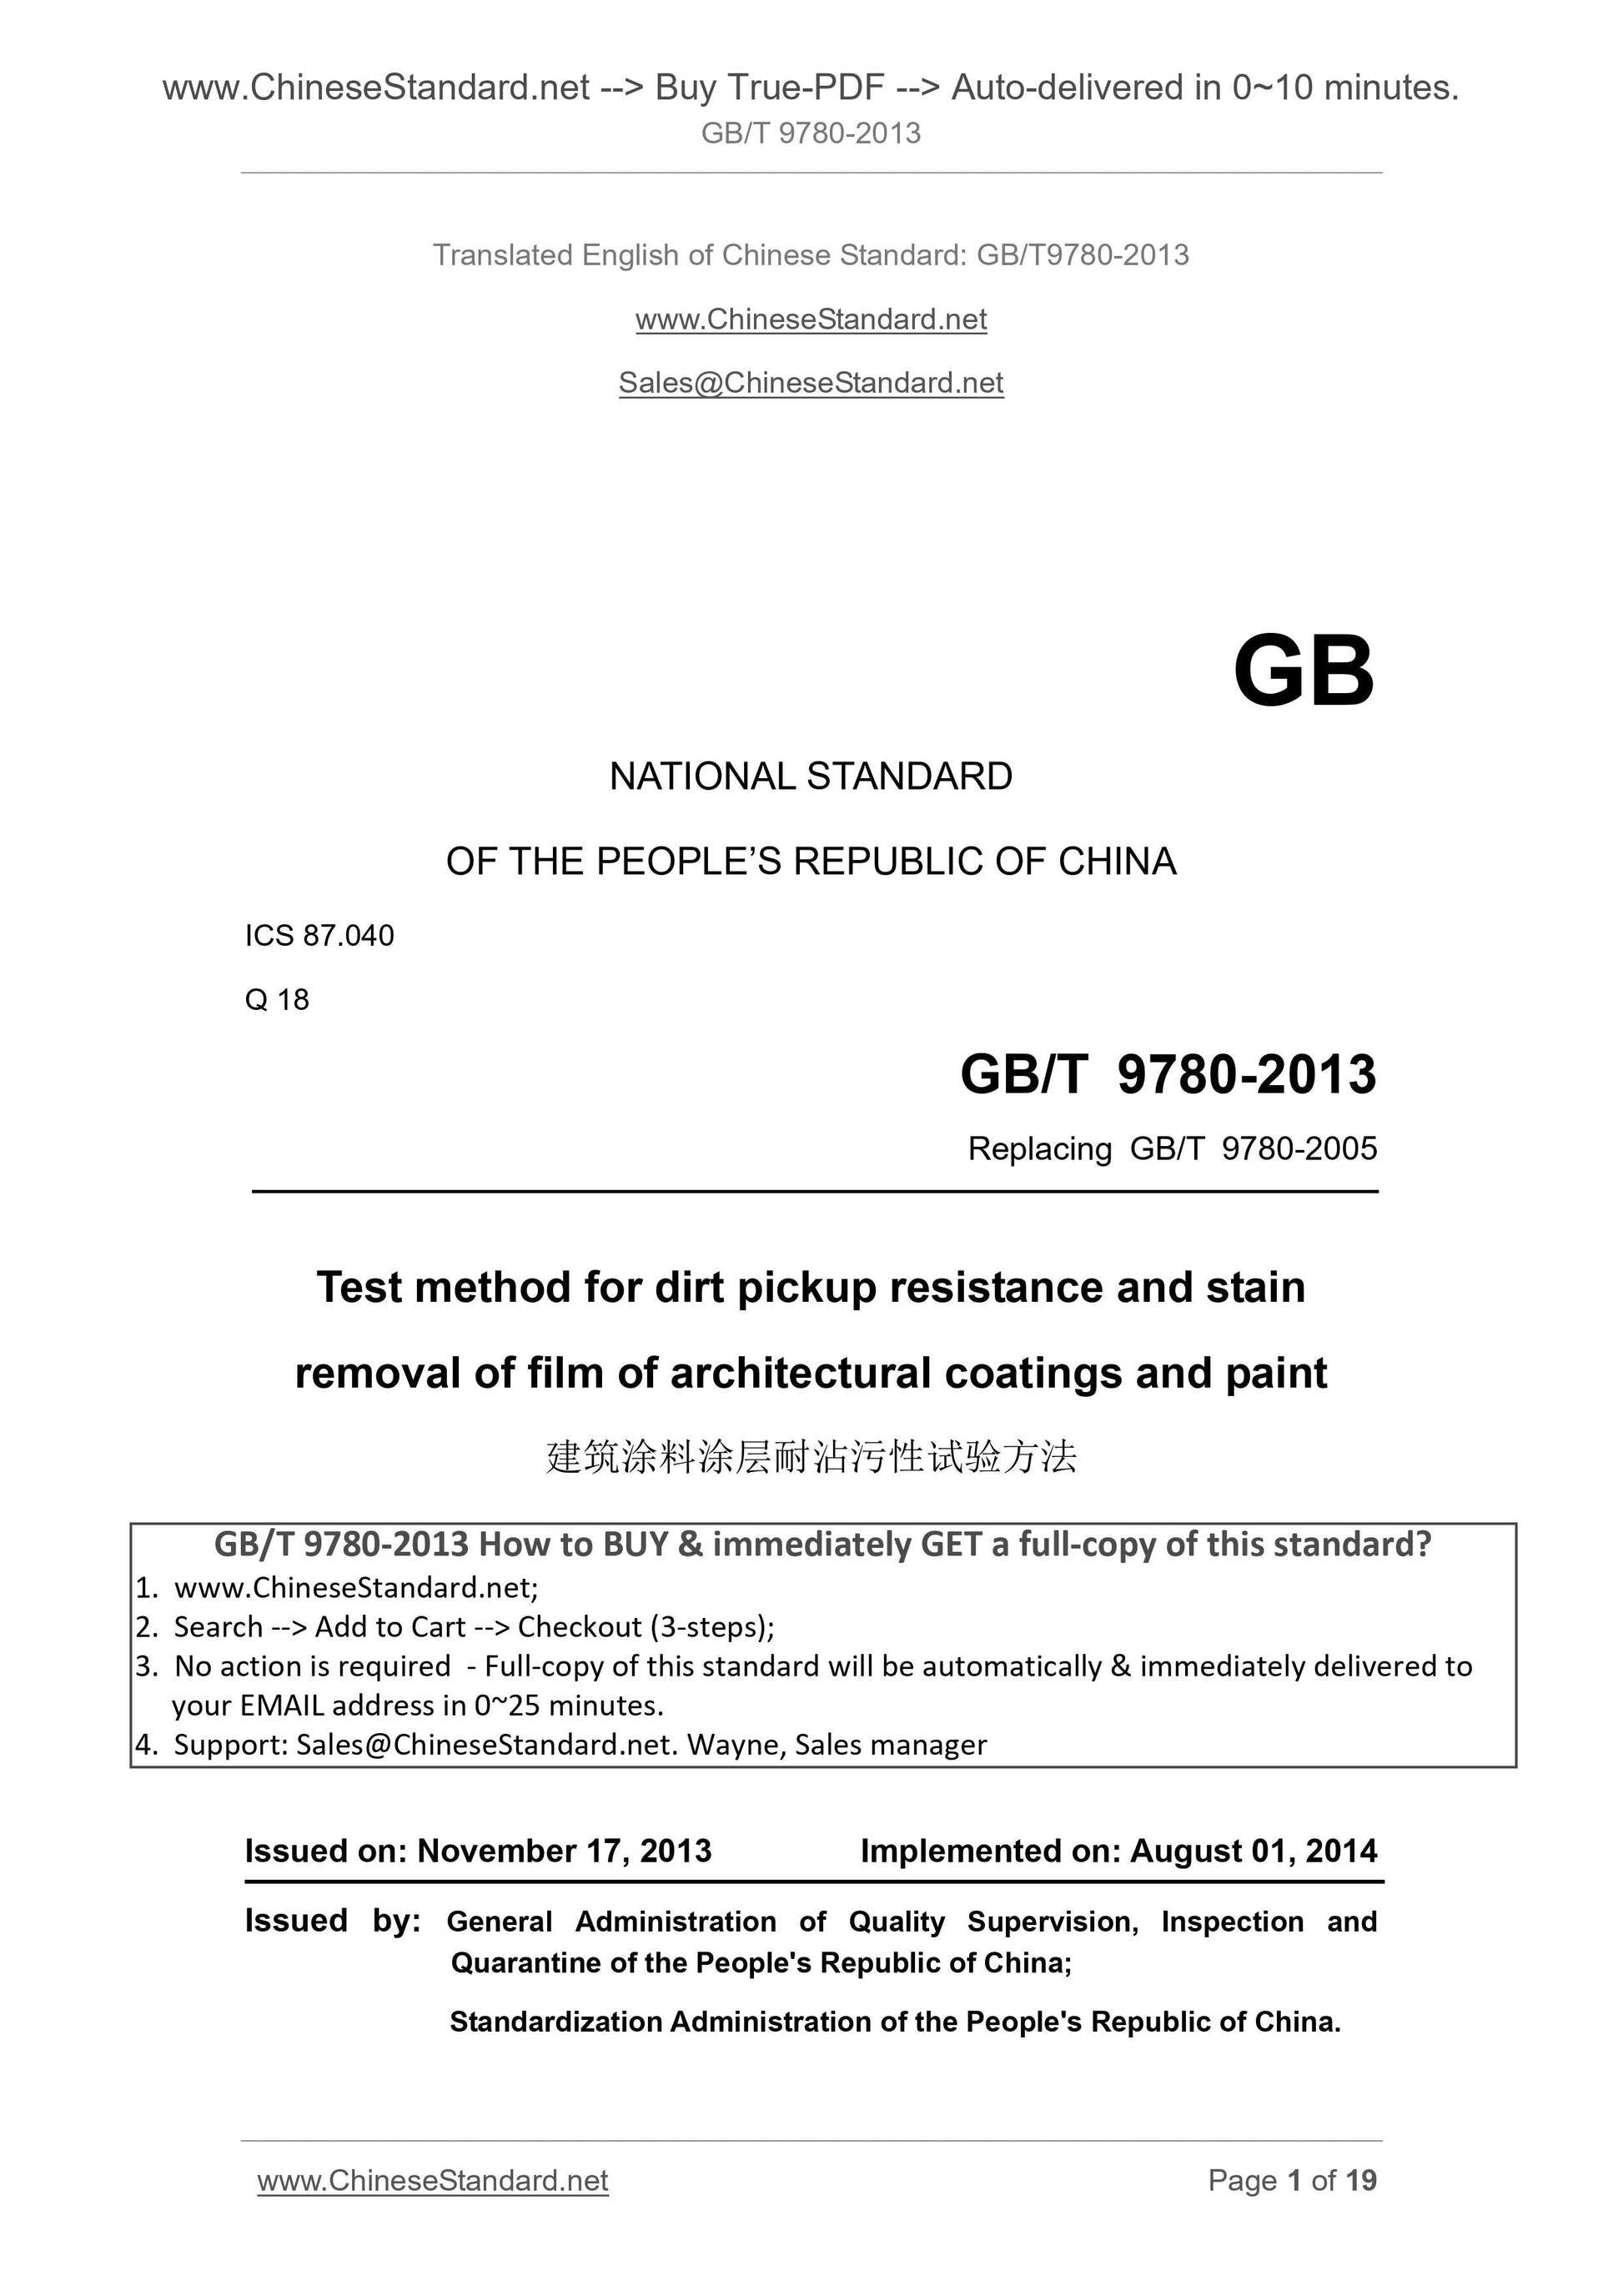 GB/T 9780-2013 Page 1